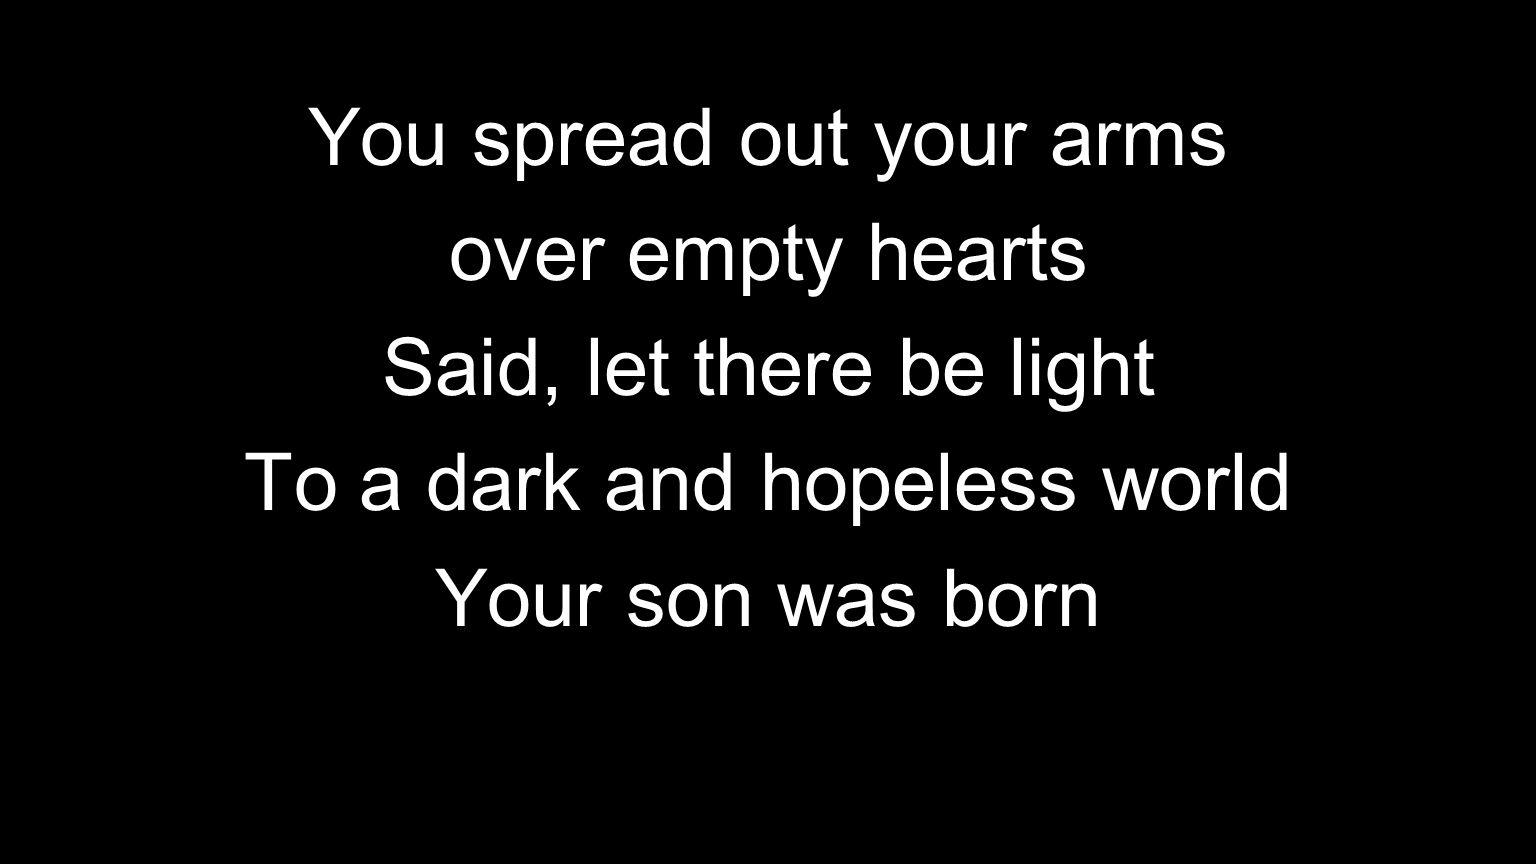 You spread out your arms over empty hearts Said, let there be light To a dark and hopeless world Your son was born